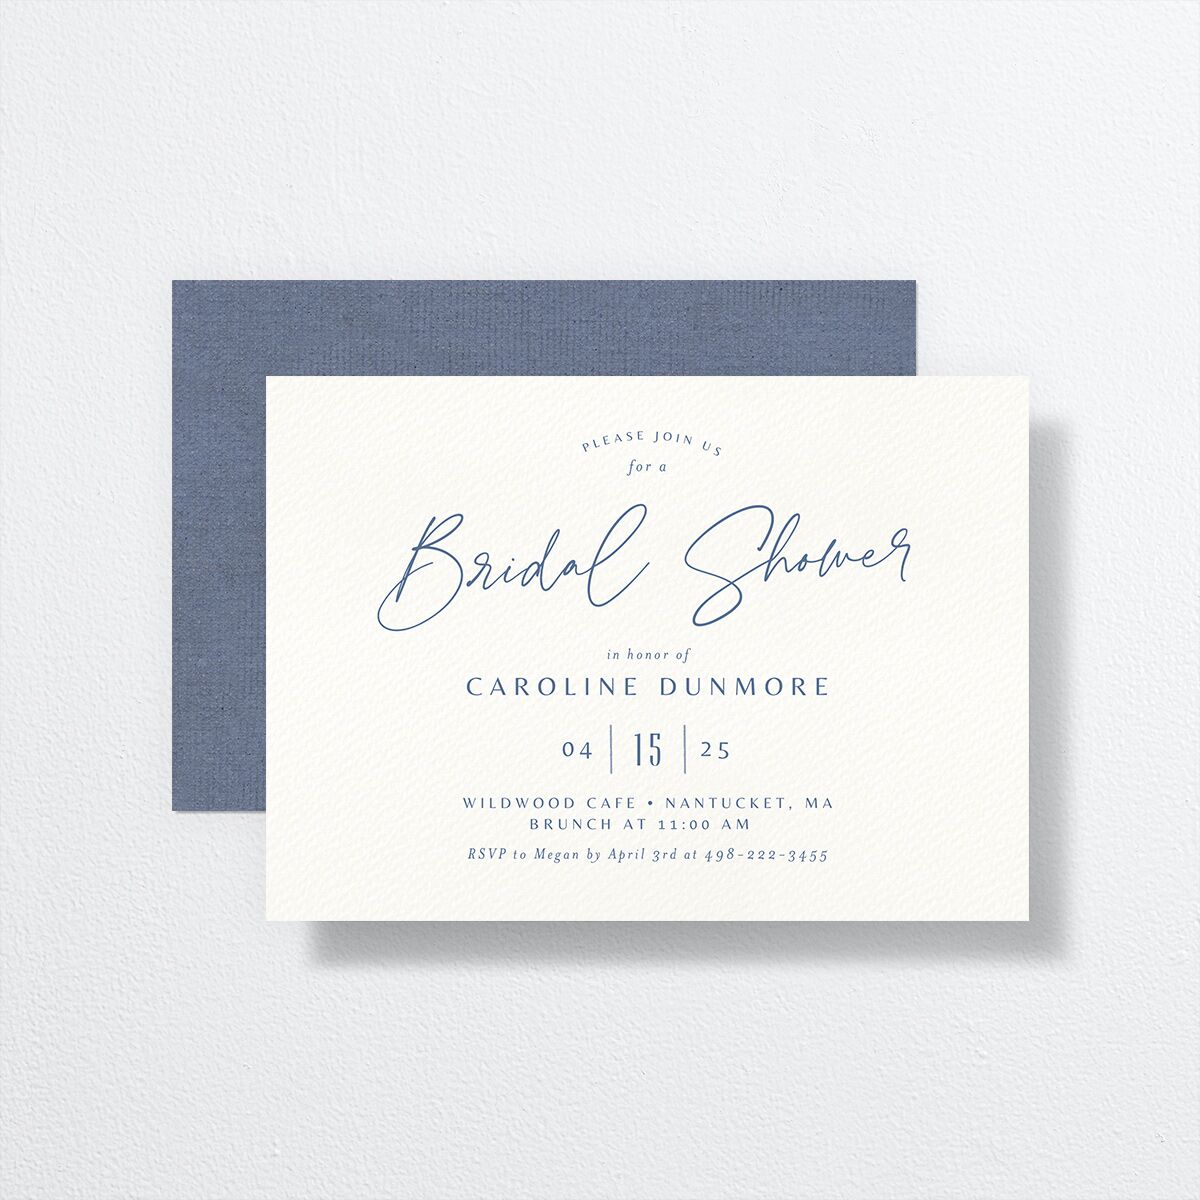 Coastal Love Bridal Shower Invitations front-and-back in blue